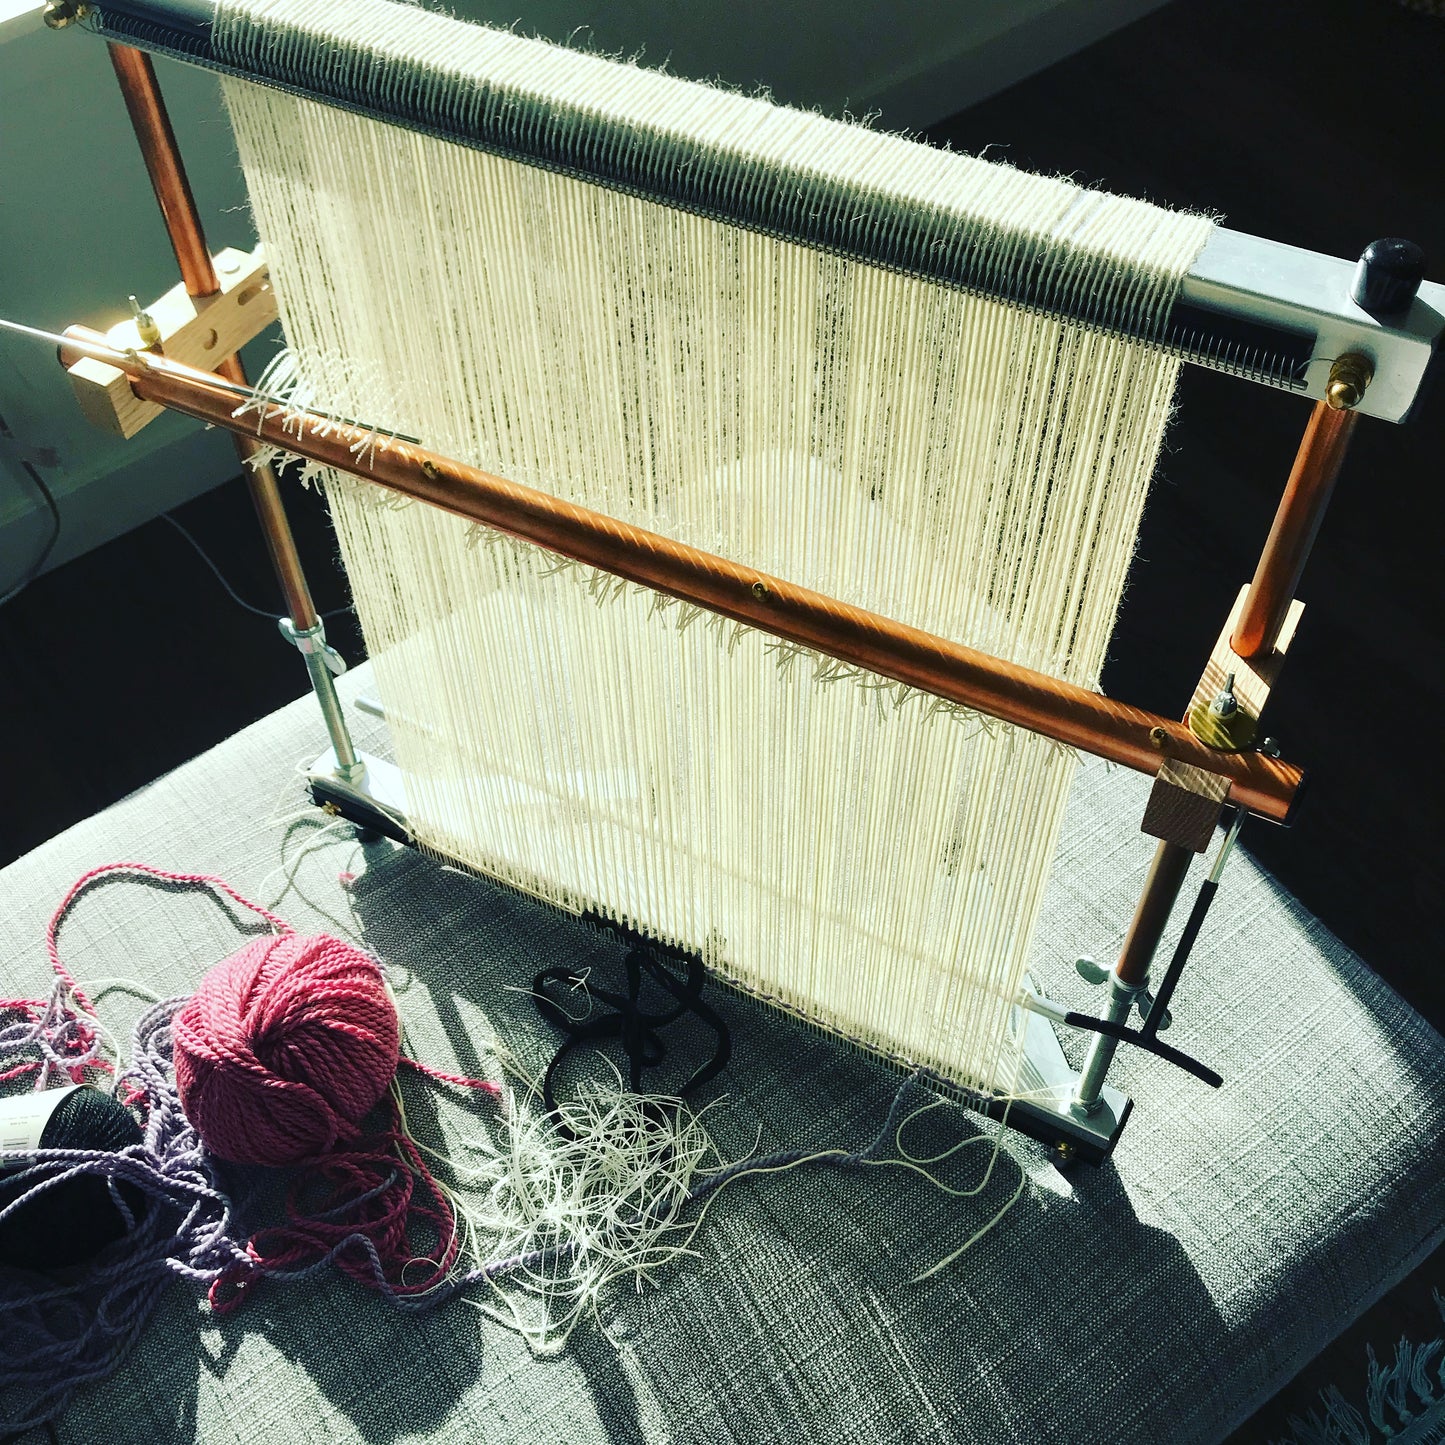 Joining Pin-Loom Pieces on the Loom